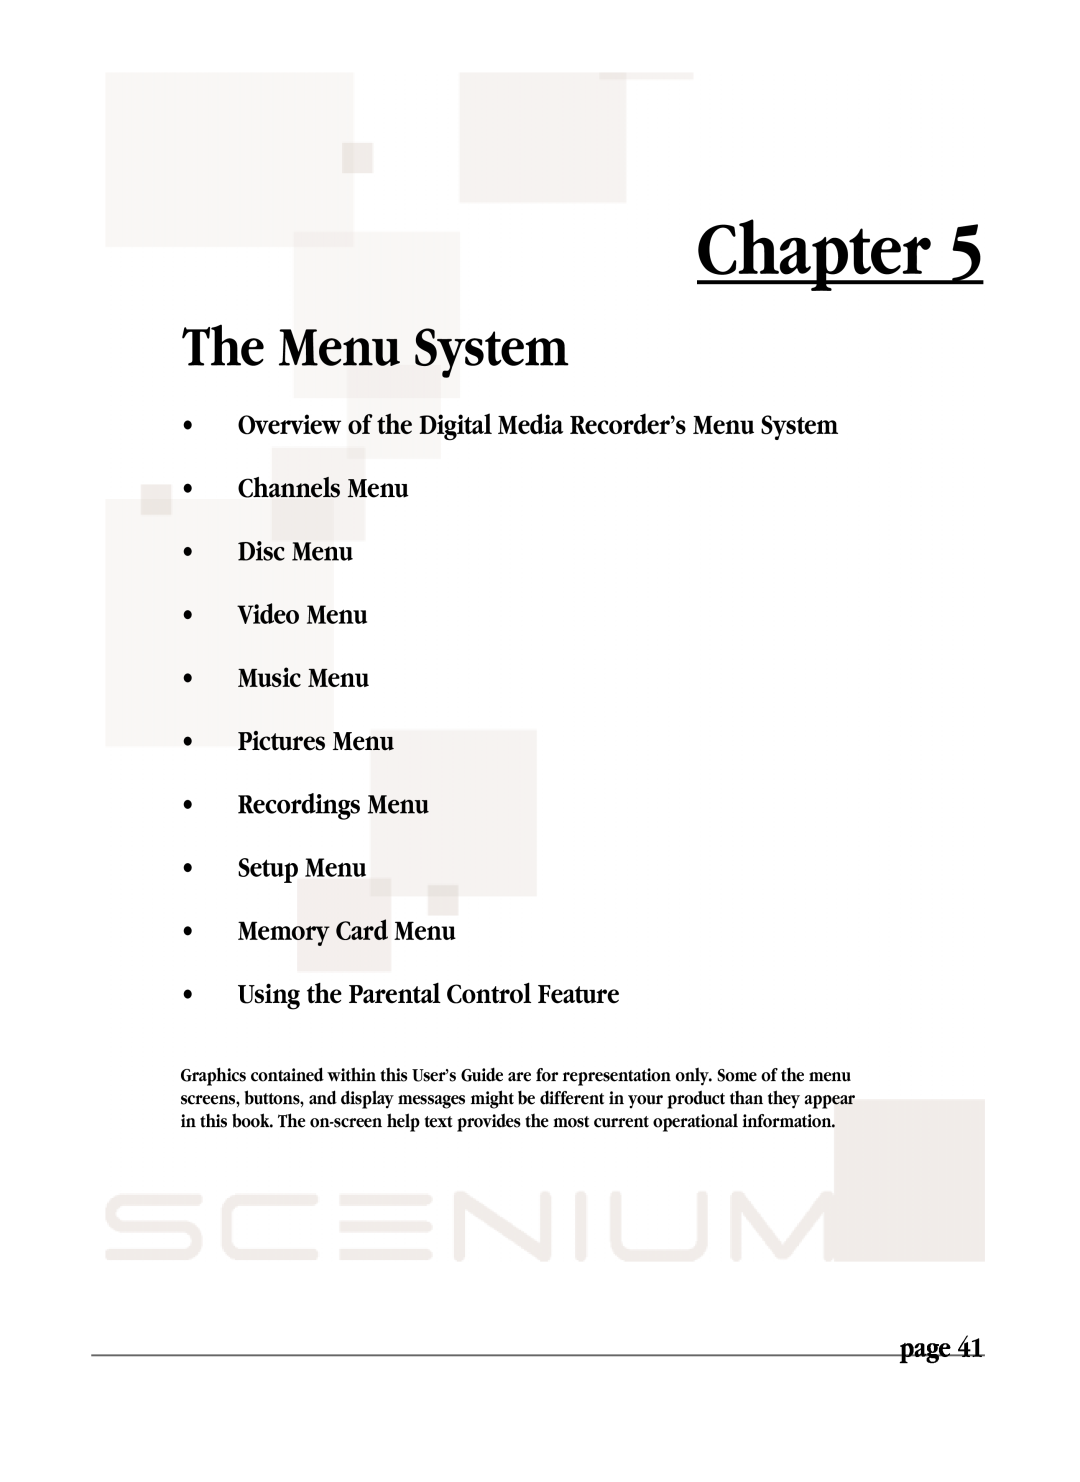 RCA DRS7000N manual The Menu System, Overview of the Digital Media Recorder’s Menu System Channels Menu, Chapter, page 